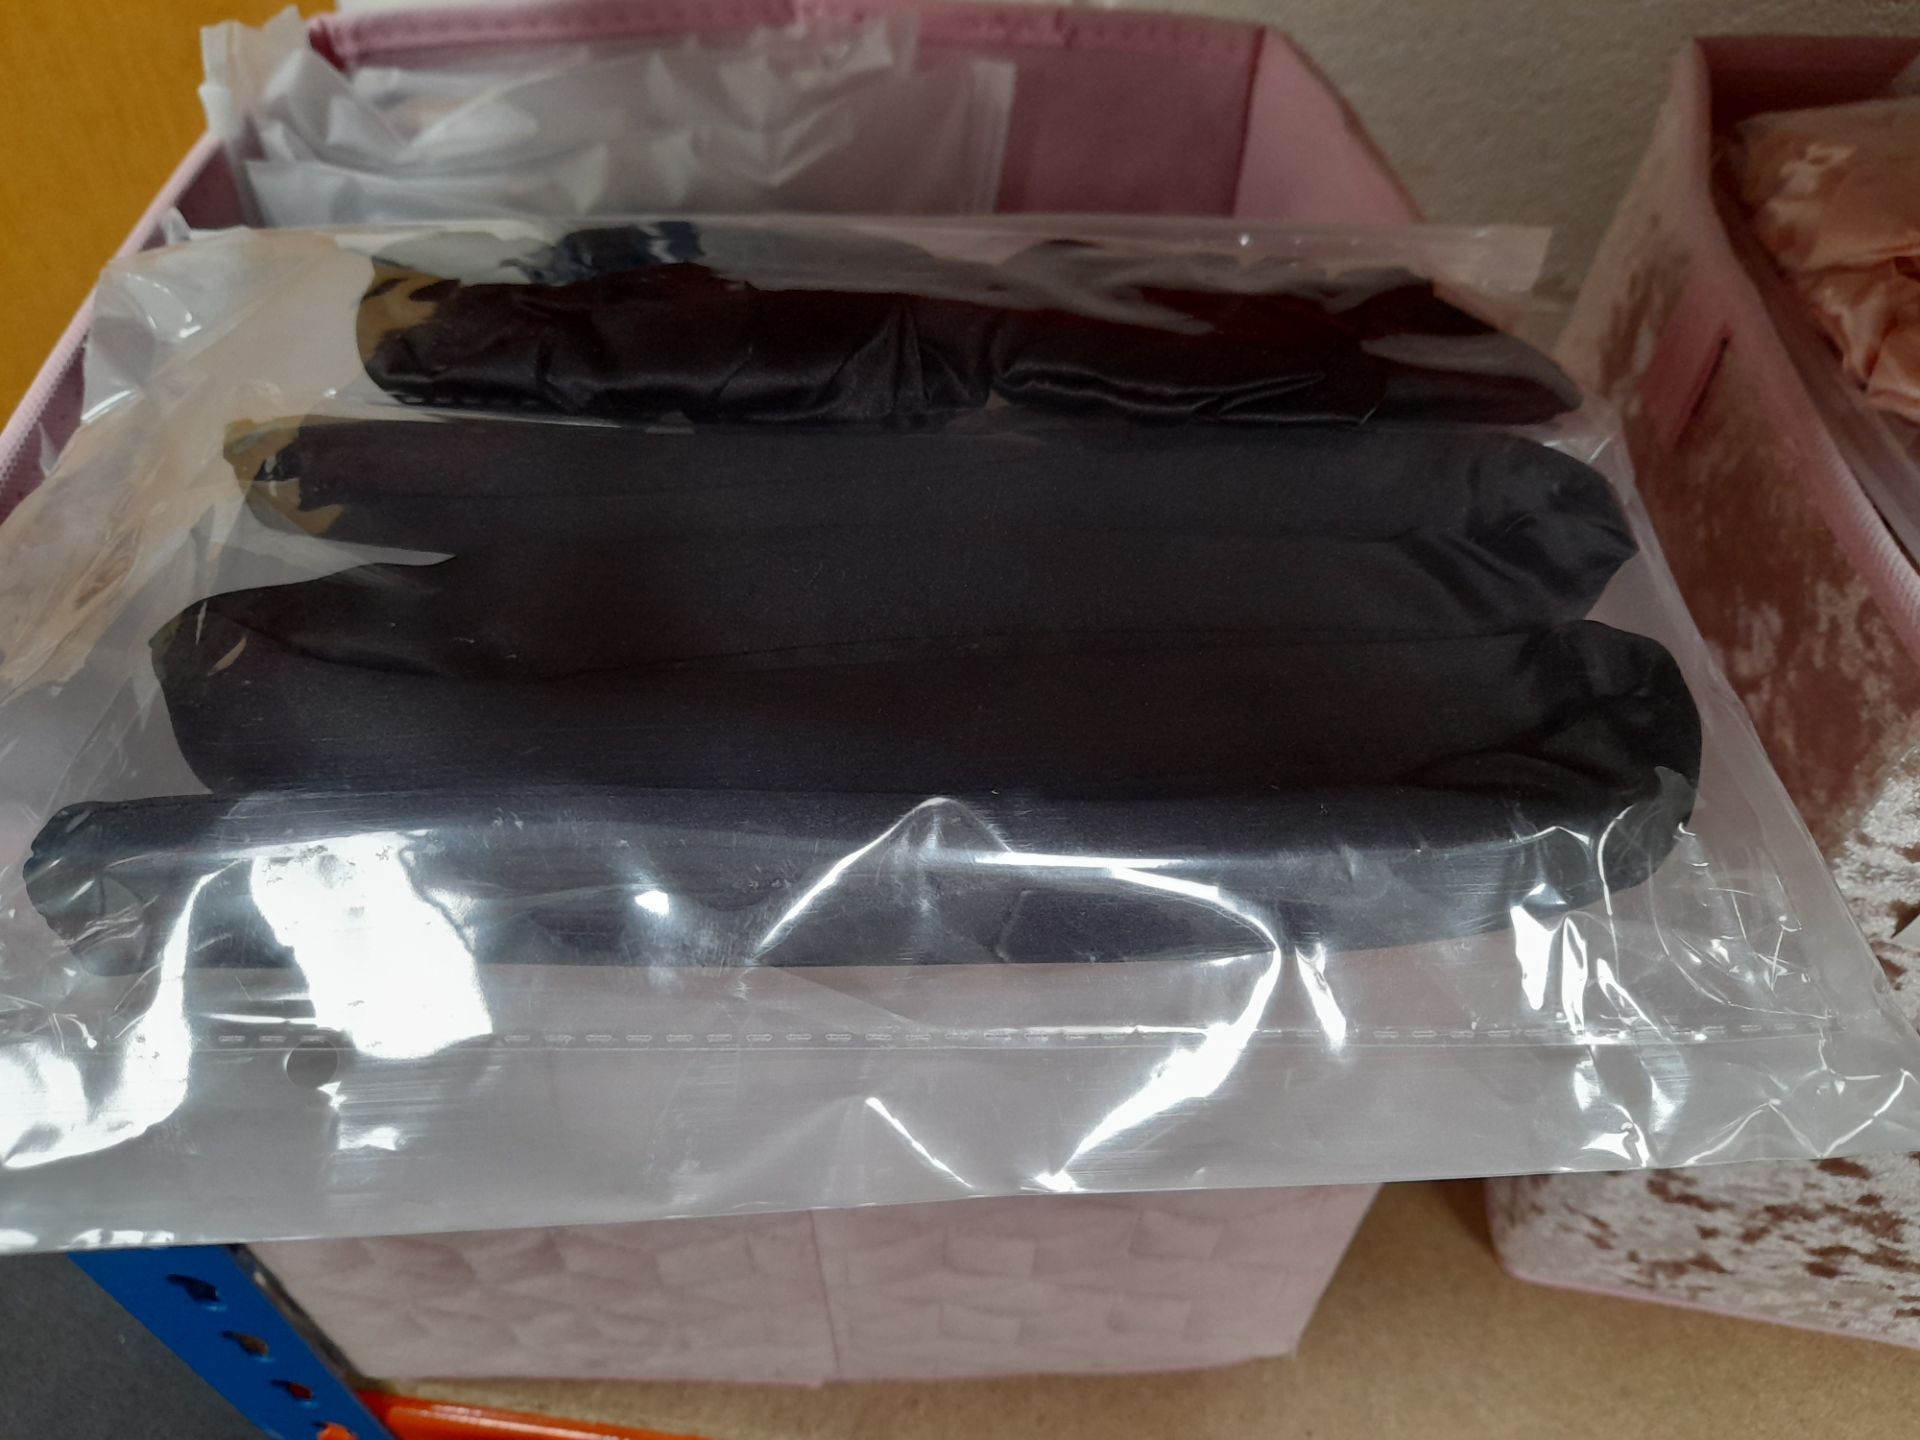 16 x Silk Hair Styling Sets Black - Image 2 of 3